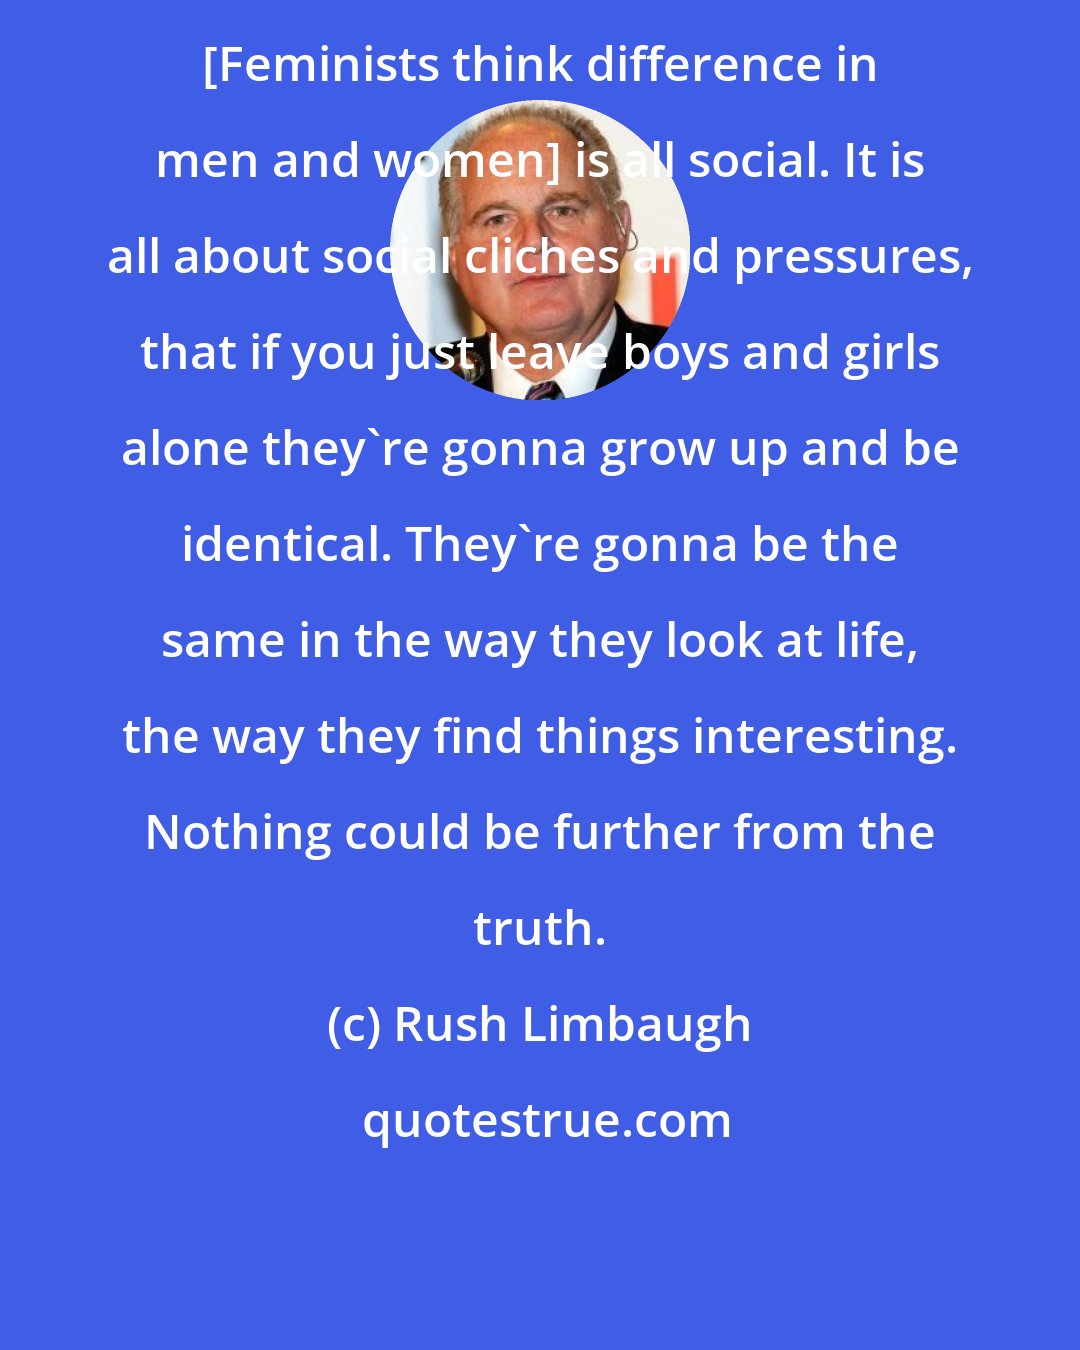 Rush Limbaugh: [Feminists think difference in men and women] is all social. It is all about social cliches and pressures, that if you just leave boys and girls alone they're gonna grow up and be identical. They're gonna be the same in the way they look at life, the way they find things interesting. Nothing could be further from the truth.